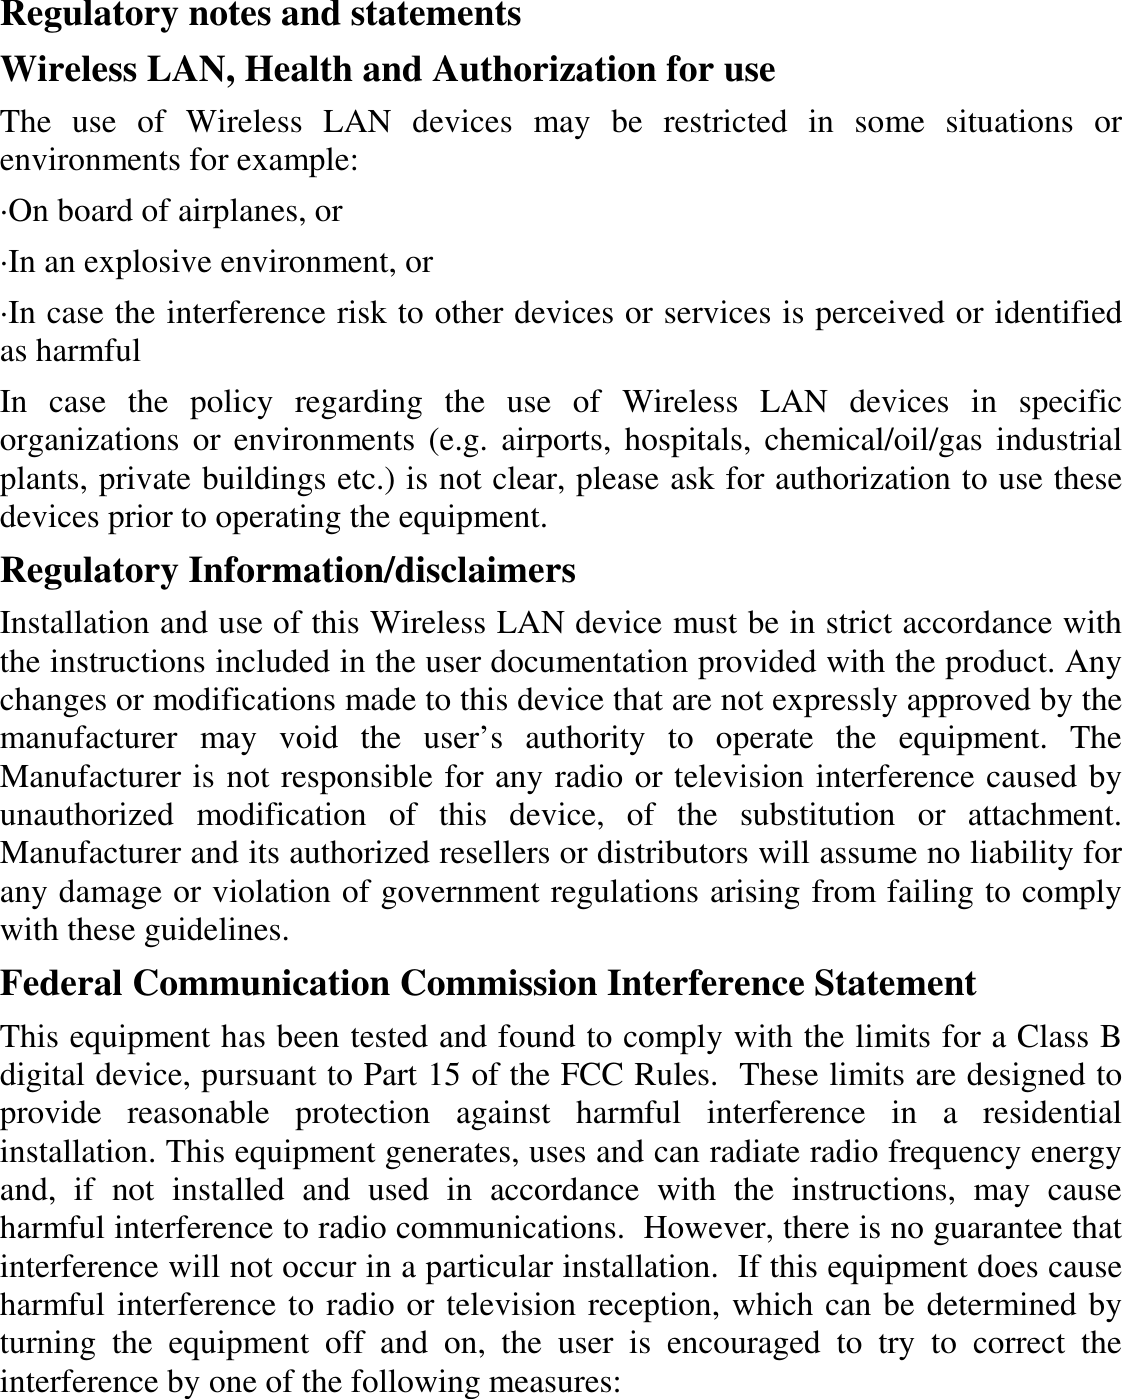  Regulatory notes and statements Wireless LAN, Health and Authorization for use The  use  of  Wireless  LAN  devices  may  be  restricted  in  some  situations  or environments for example: ·On board of airplanes, or ·In an explosive environment, or ·In case the interference risk to other devices or services is perceived or identified as harmful In  case  the  policy  regarding  the  use  of  Wireless  LAN  devices  in  specific organizations or  environments (e.g.  airports,  hospitals,  chemical/oil/gas industrial plants, private buildings etc.) is not clear, please ask for authorization to use these devices prior to operating the equipment. Regulatory Information/disclaimers Installation and use of this Wireless LAN device must be in strict accordance with the instructions included in the user documentation provided with the product. Any changes or modifications made to this device that are not expressly approved by the manufacturer  may  void  the  user’s  authority  to  operate  the  equipment.  The Manufacturer is not responsible for any radio or television interference caused by unauthorized  modification  of  this  device,  of  the  substitution  or  attachment. Manufacturer and its authorized resellers or distributors will assume no liability for any damage or violation of government regulations arising from failing to comply with these guidelines. Federal Communication Commission Interference Statement This equipment has been tested and found to comply with the limits for a Class B digital device, pursuant to Part 15 of the FCC Rules.  These limits are designed to provide  reasonable  protection  against  harmful  interference  in  a  residential installation. This equipment generates, uses and can radiate radio frequency energy and,  if  not  installed  and  used  in  accordance  with  the  instructions,  may  cause harmful interference to radio communications.  However, there is no guarantee that interference will not occur in a particular installation.  If this equipment does cause harmful interference to radio or television reception, which can be determined by turning  the  equipment  off  and  on,  the  user  is  encouraged  to  try  to  correct  the interference by one of the following measures: 